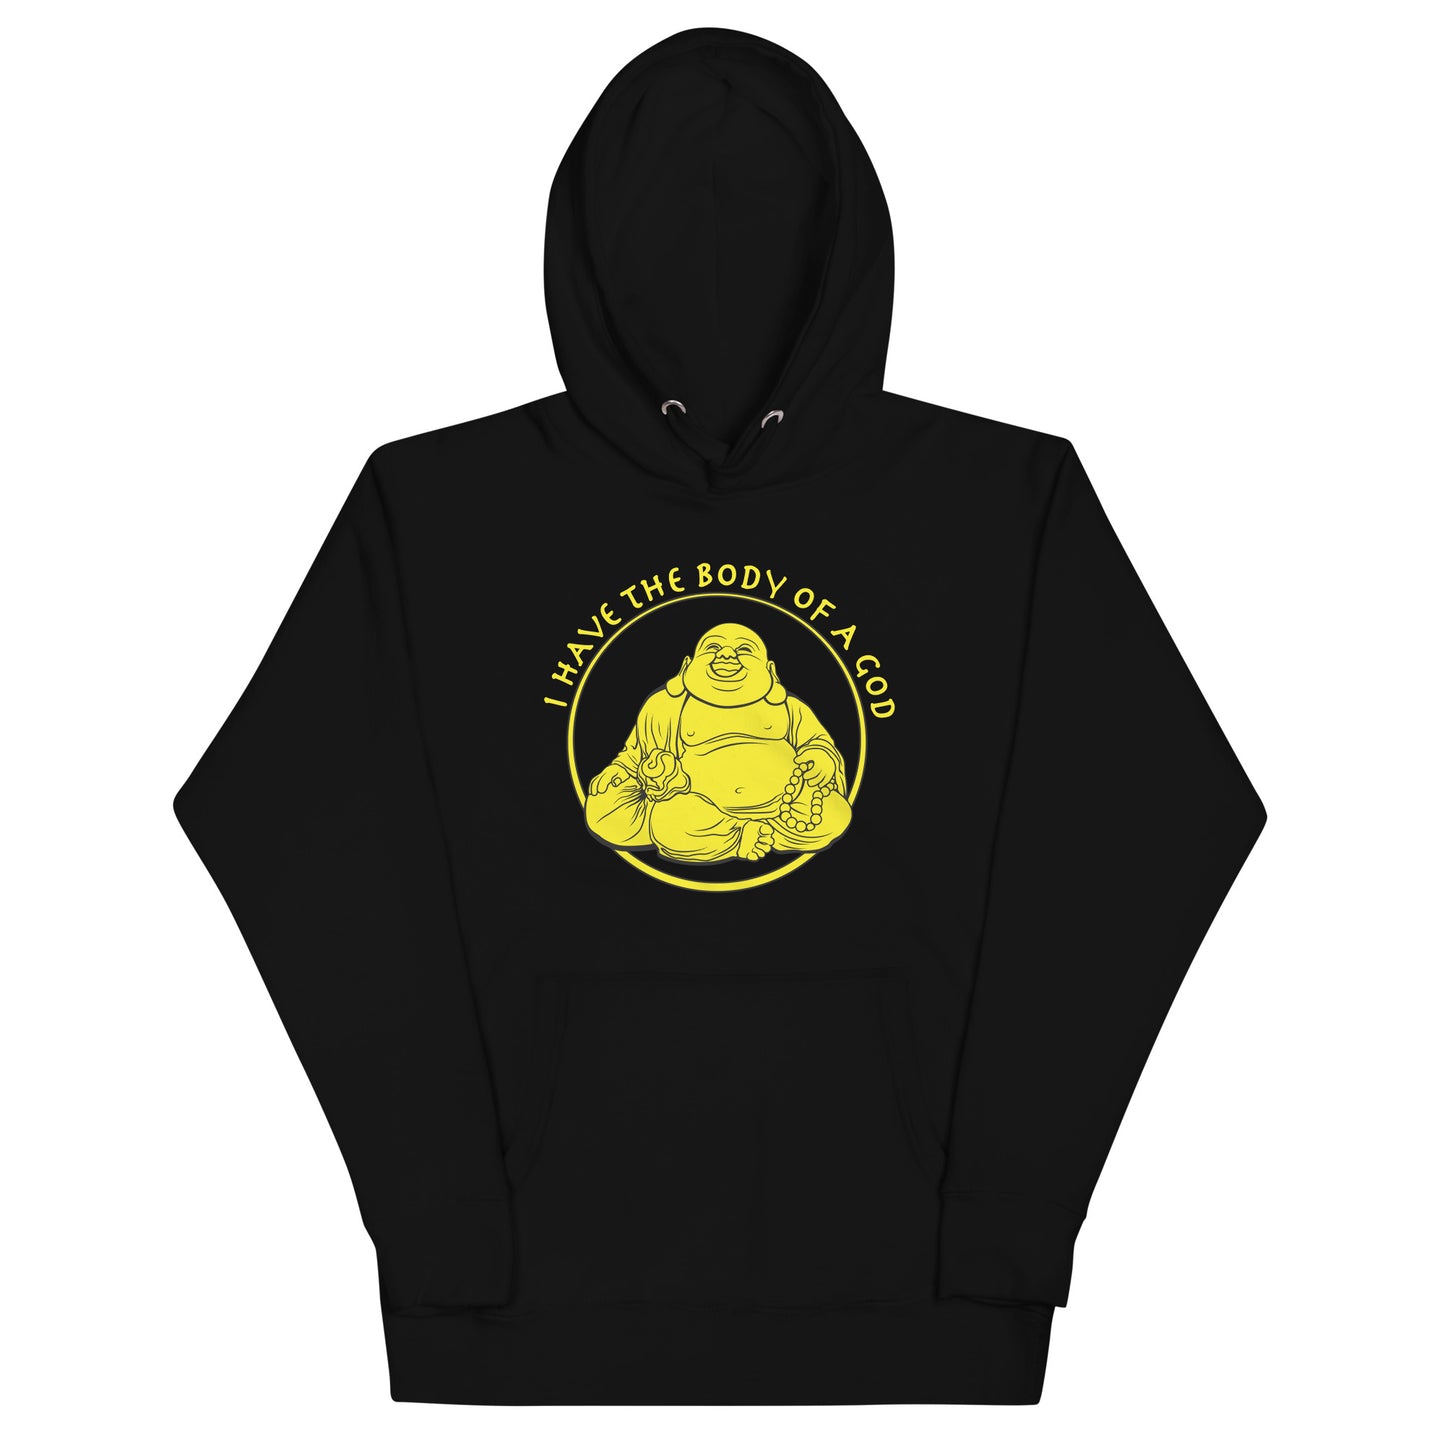 I Have the Body of a God Unisex Hoodie